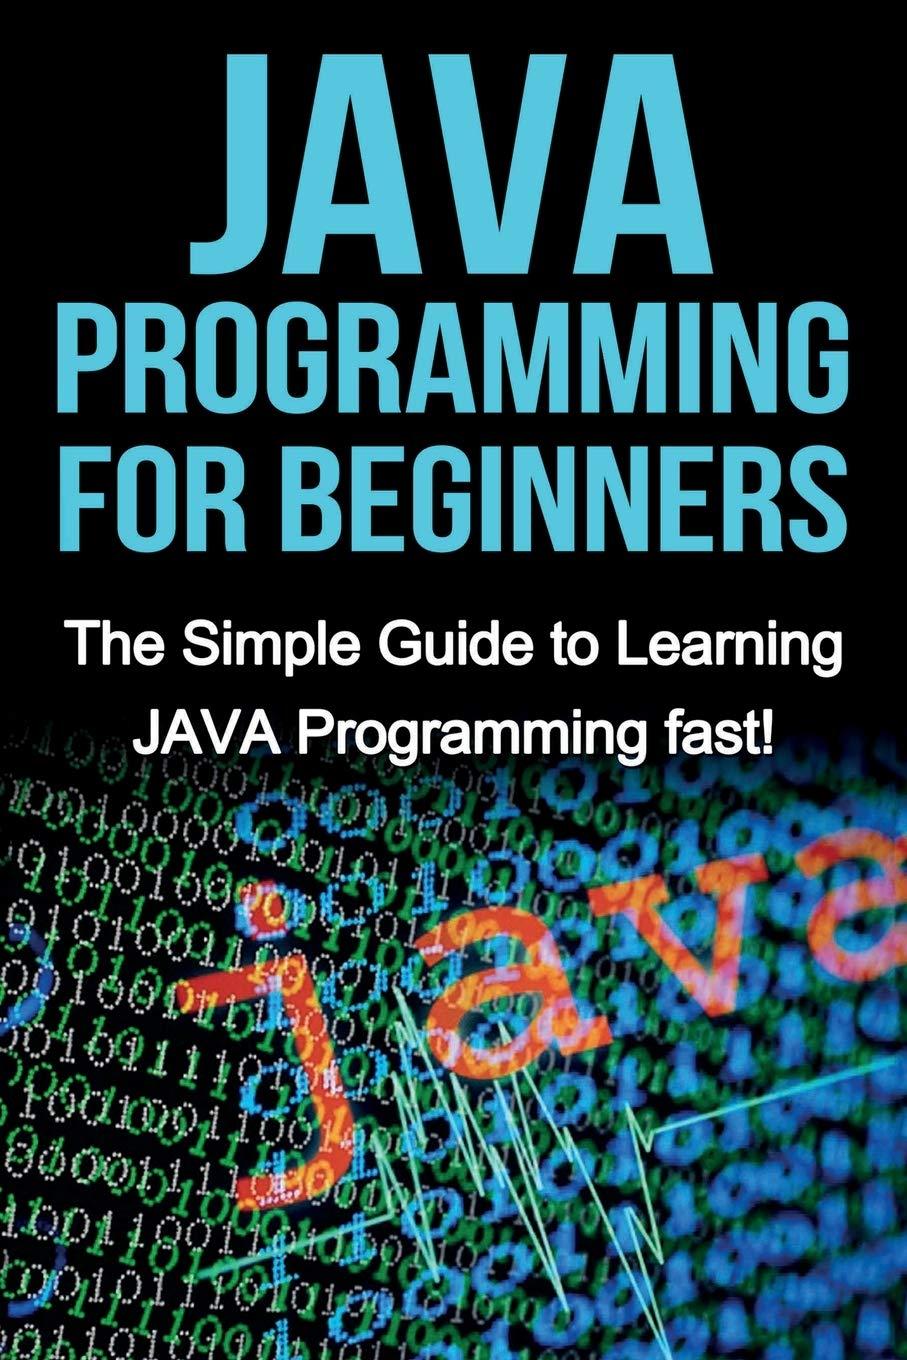 JAVA Programming For Beginners The Simple Guide To Learning JAVA Programming Fast